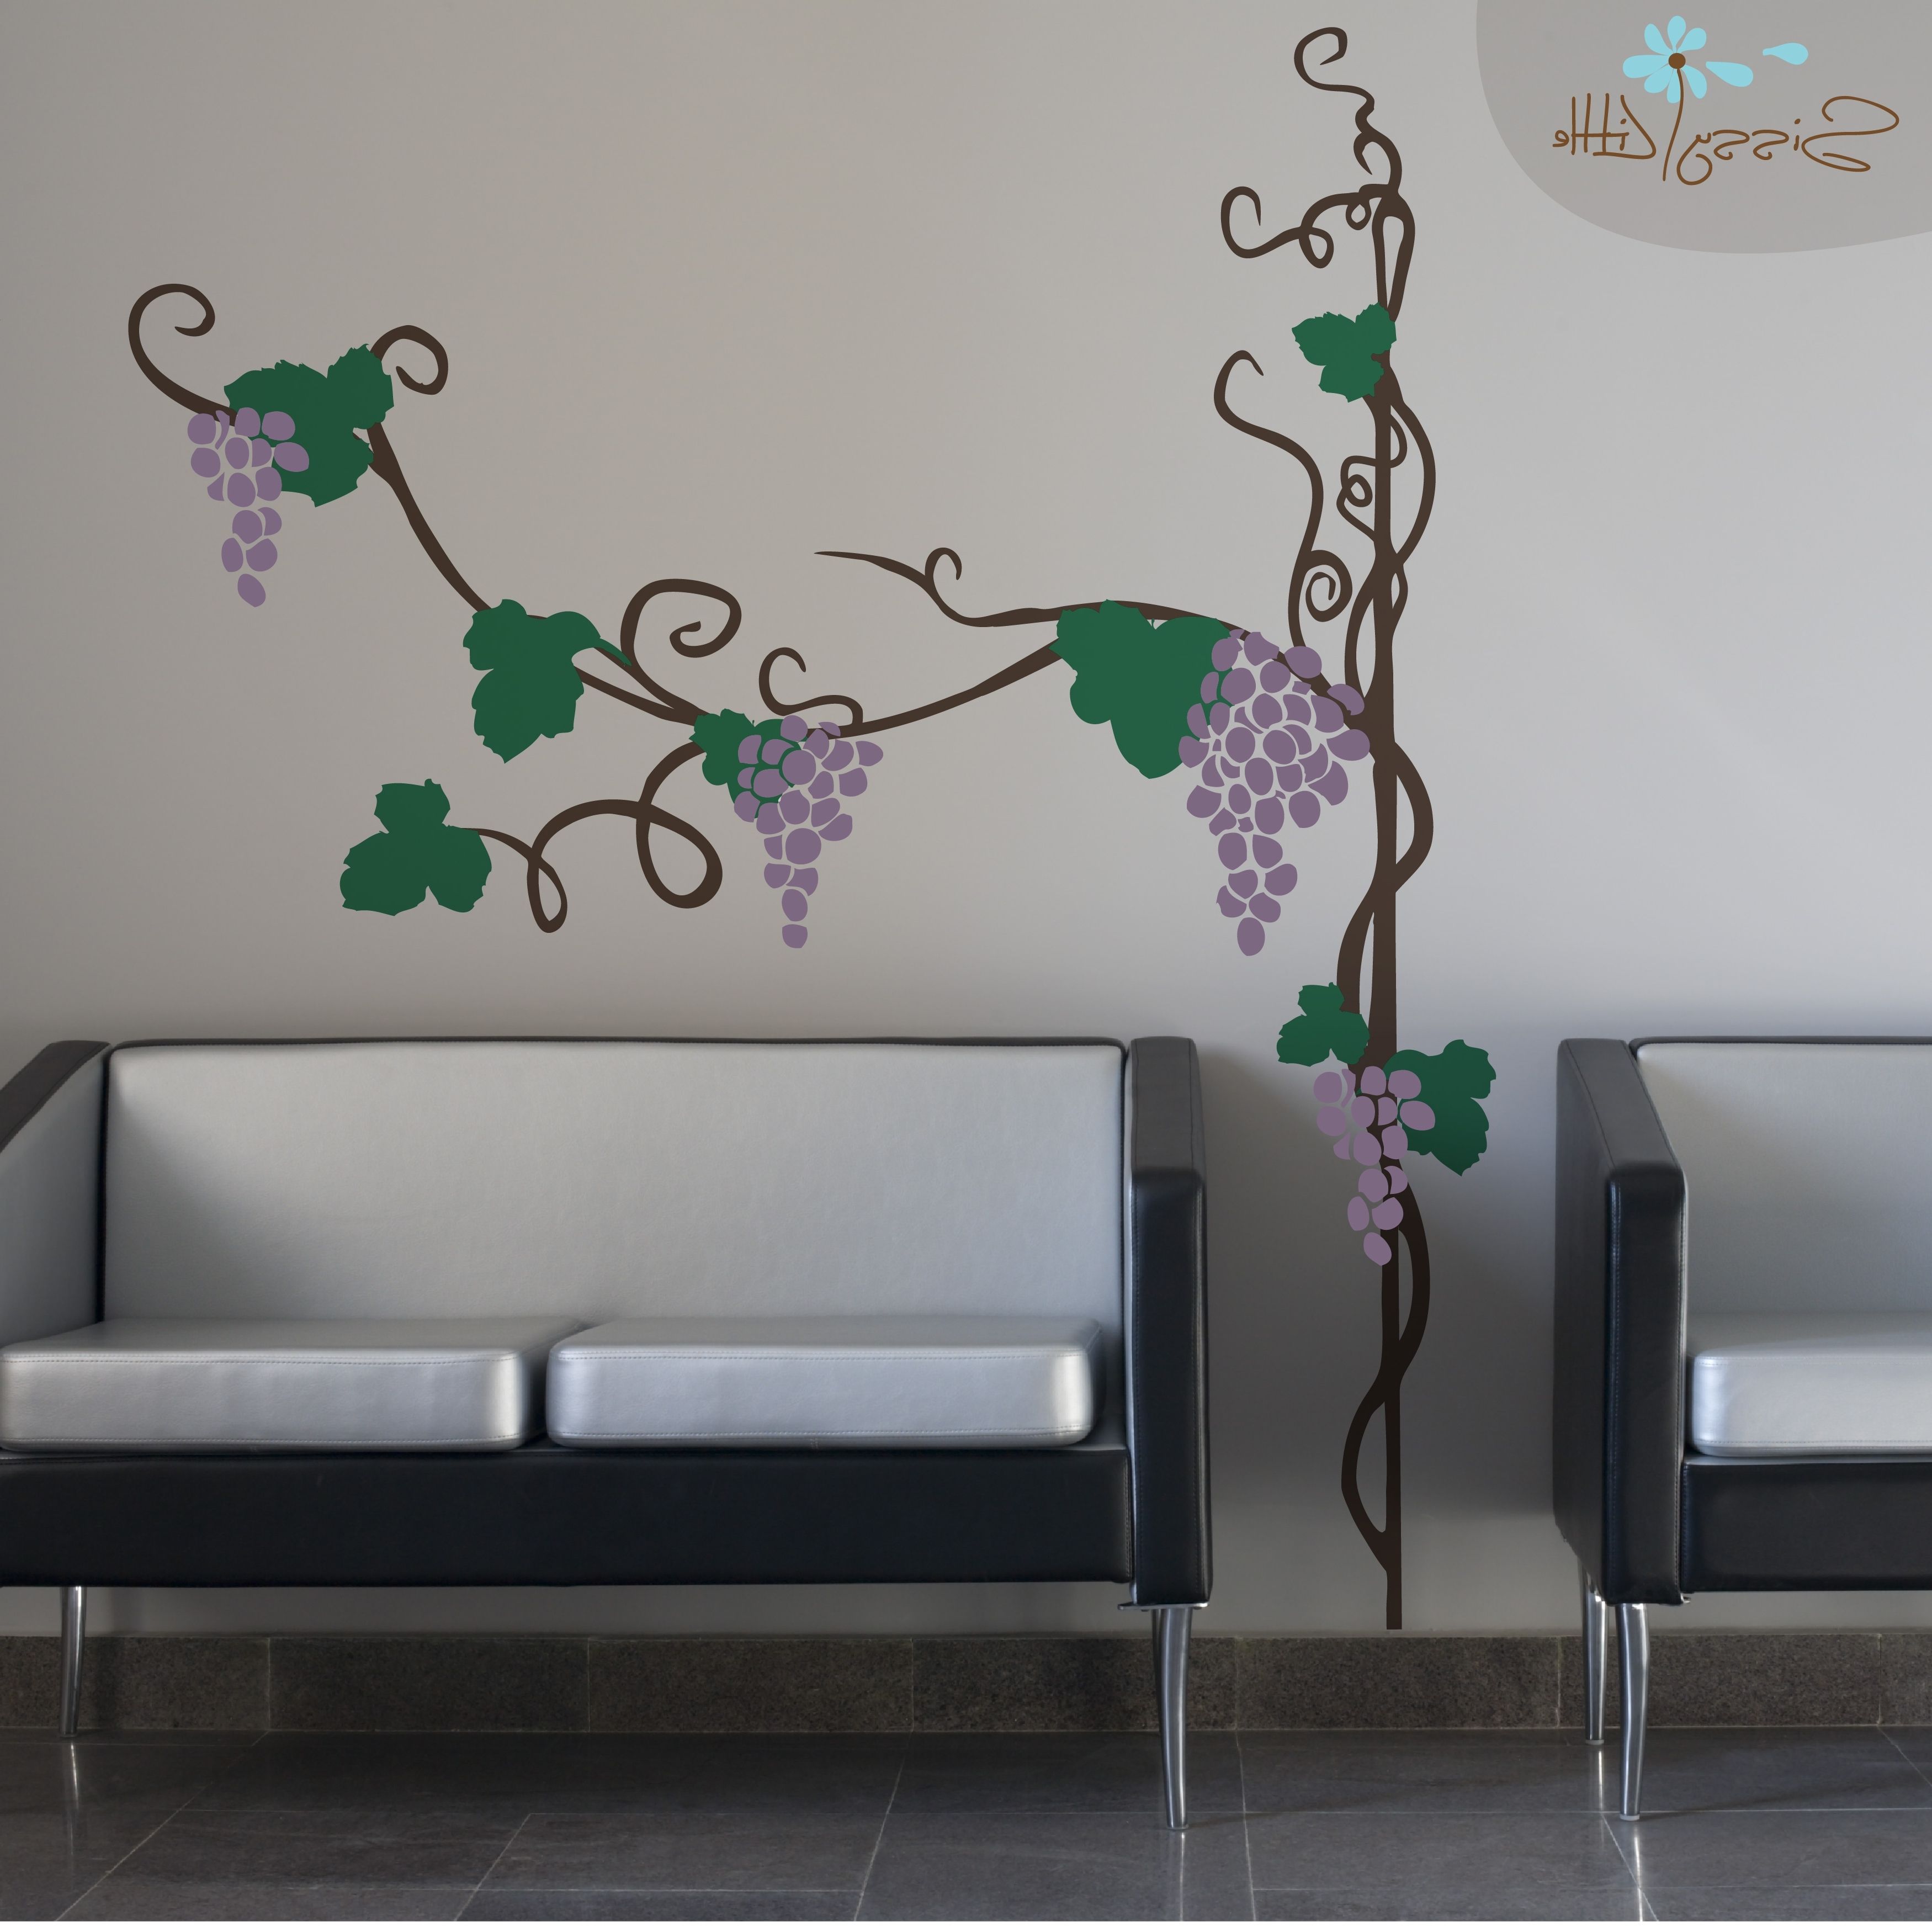 Grape Vine Wall Art Within Most Current Wall Decals: Gorgeous Grape Vine Wall Decals. Grape Vine Wall Decals (View 2 of 15)